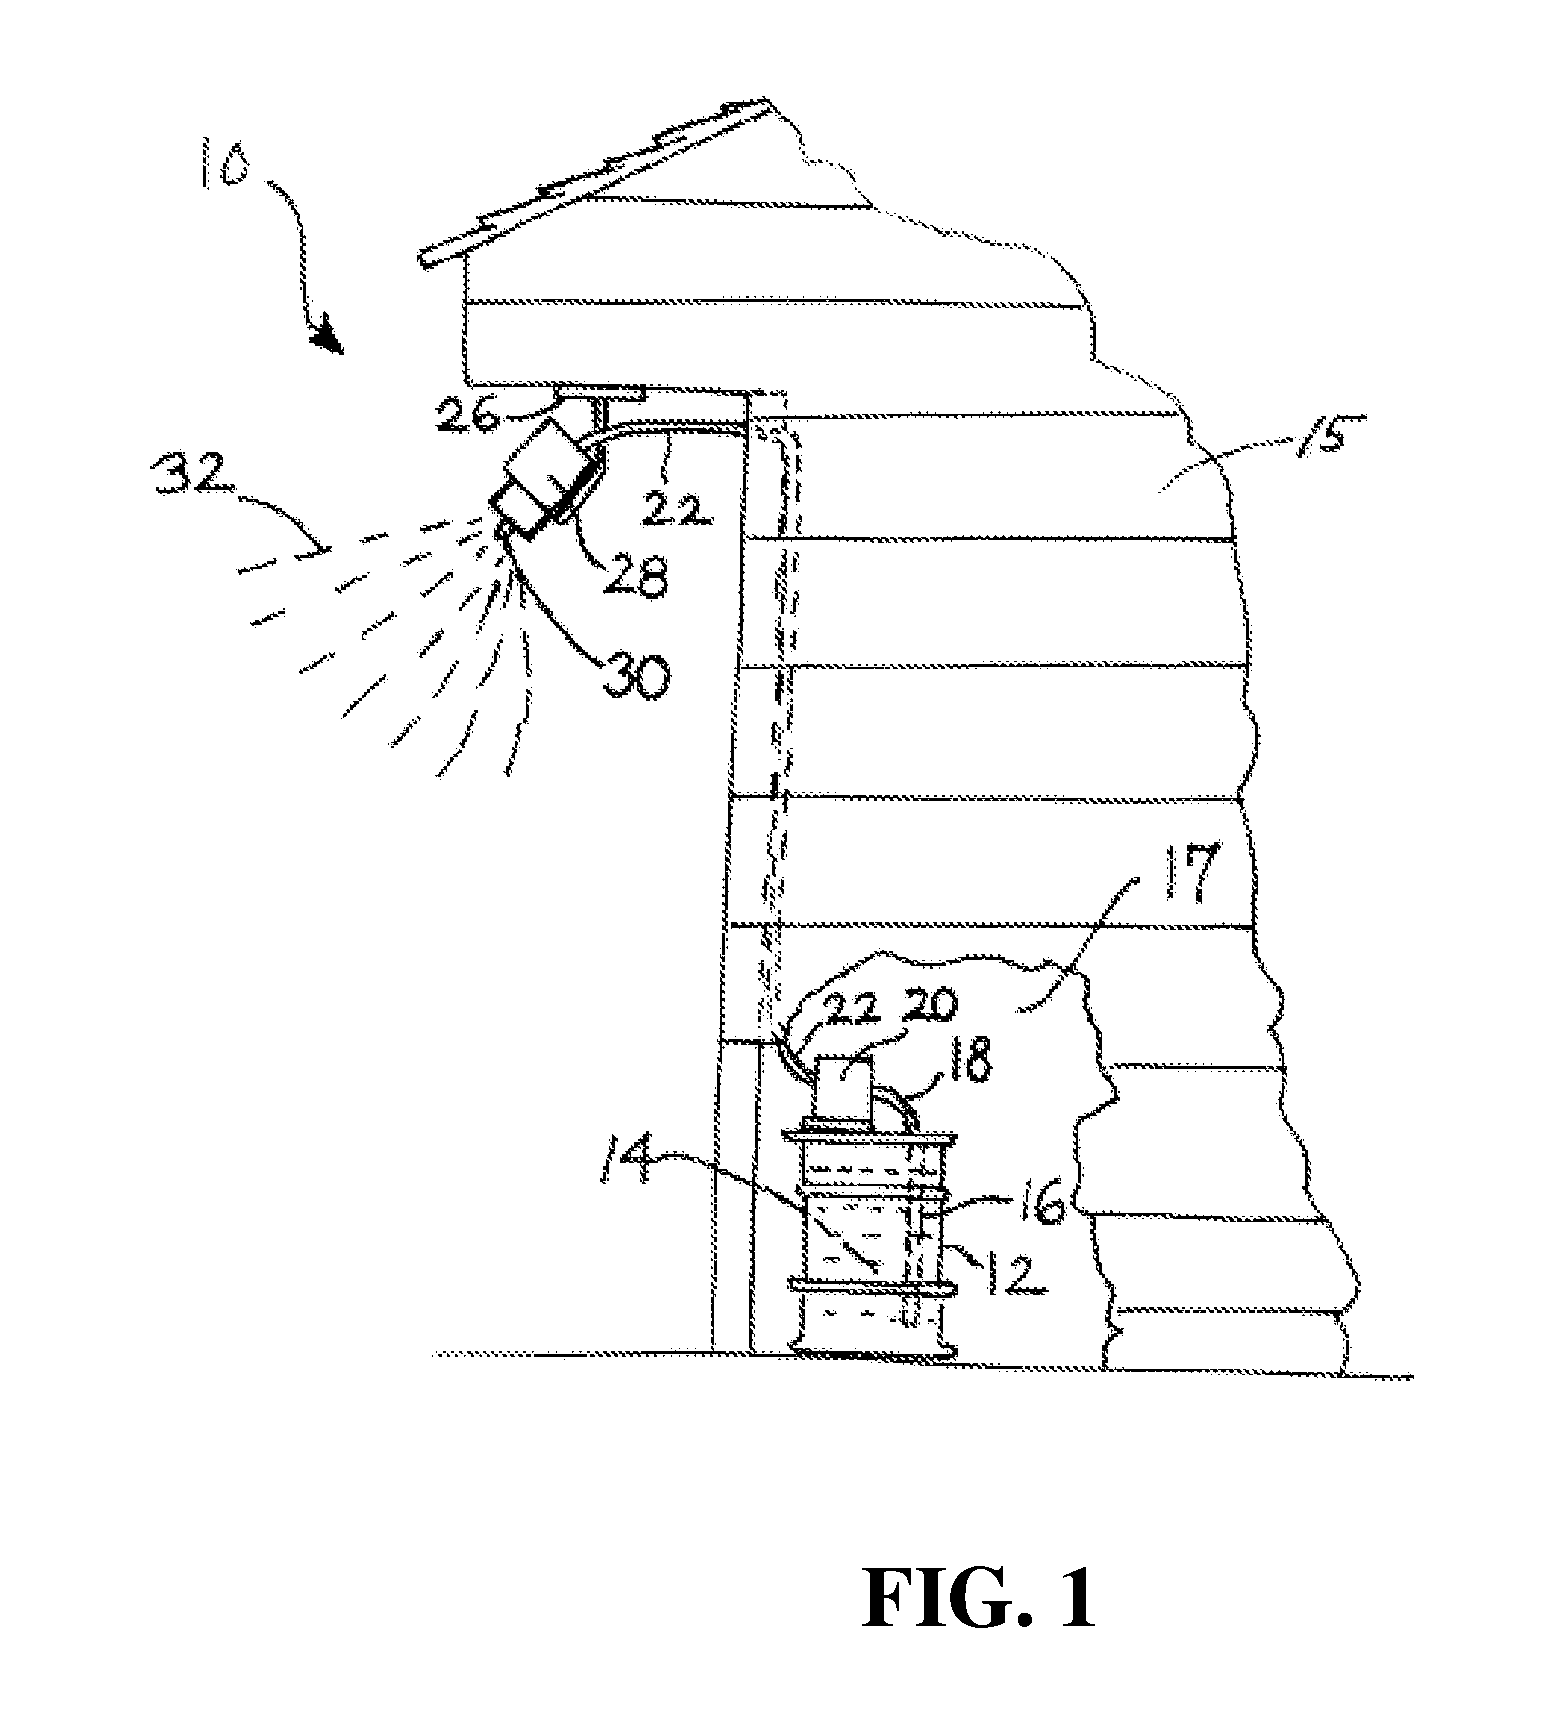 Pest-control compositions, and methods and products utilizing same